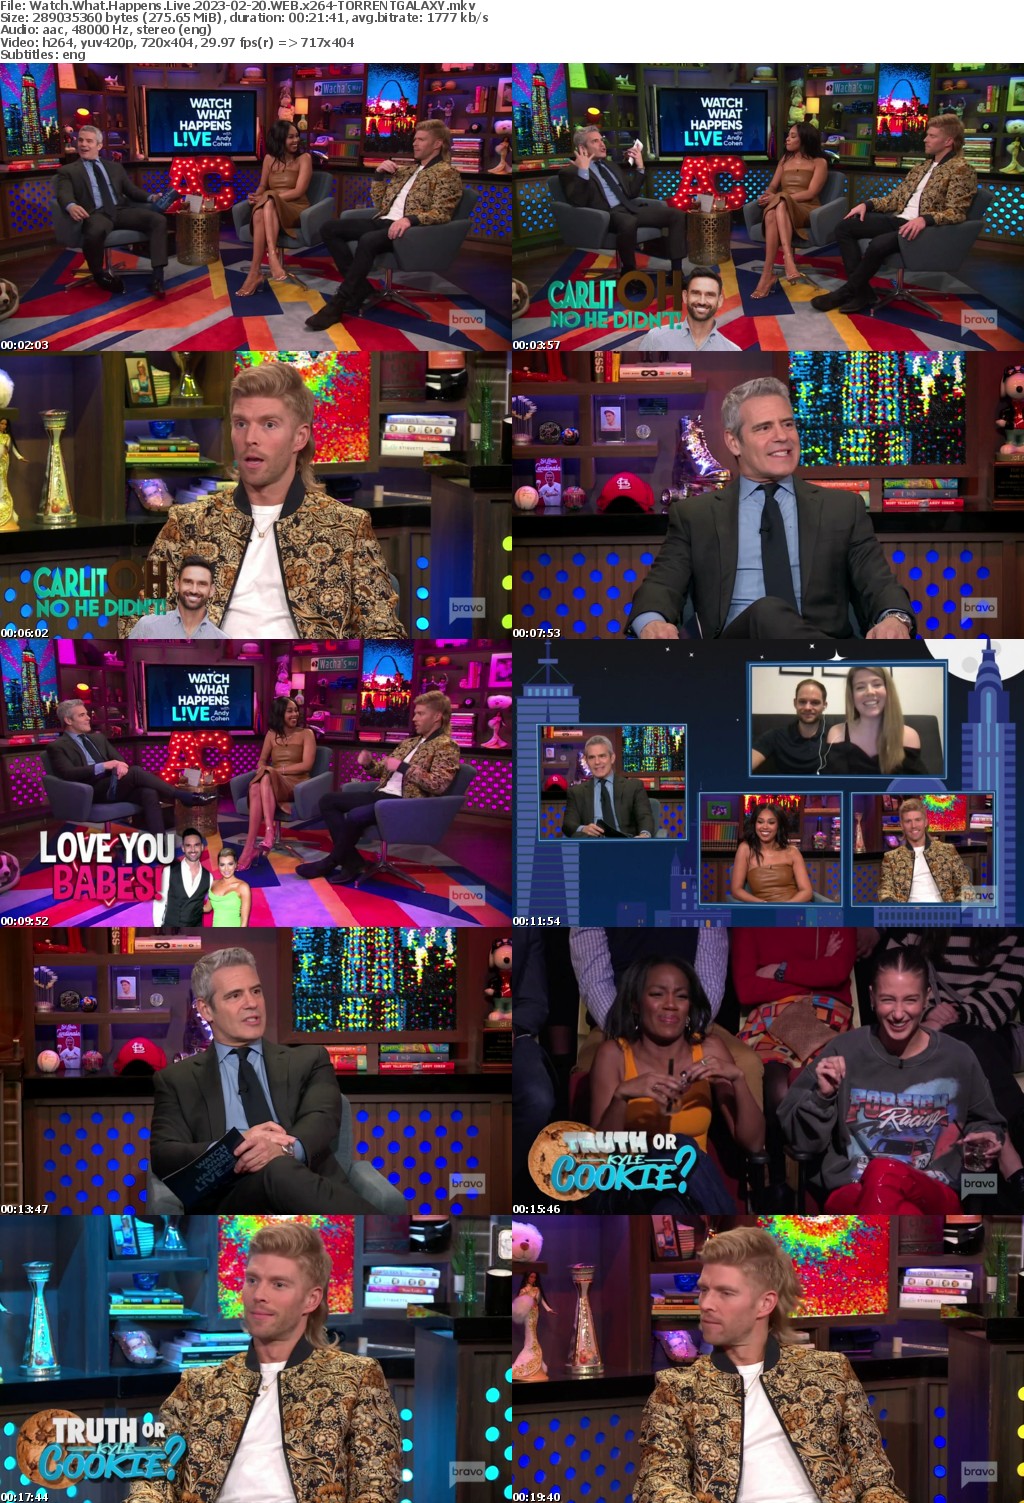 Watch What Happens Live 2023-02-20 WEB x264-GALAXY